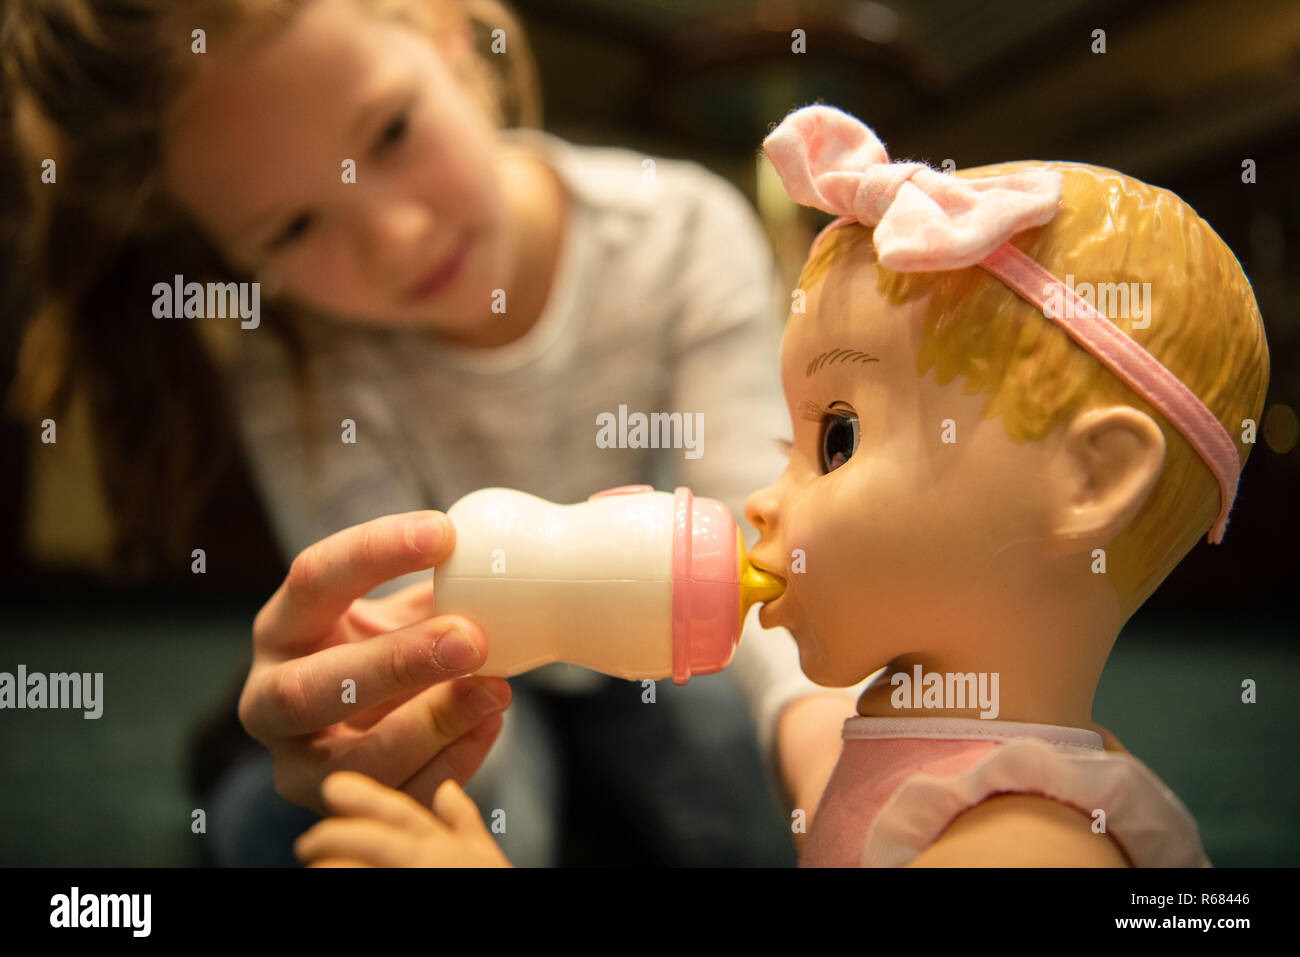 Luvabella Doll High Resolution Stock Photography and Images - Alamy